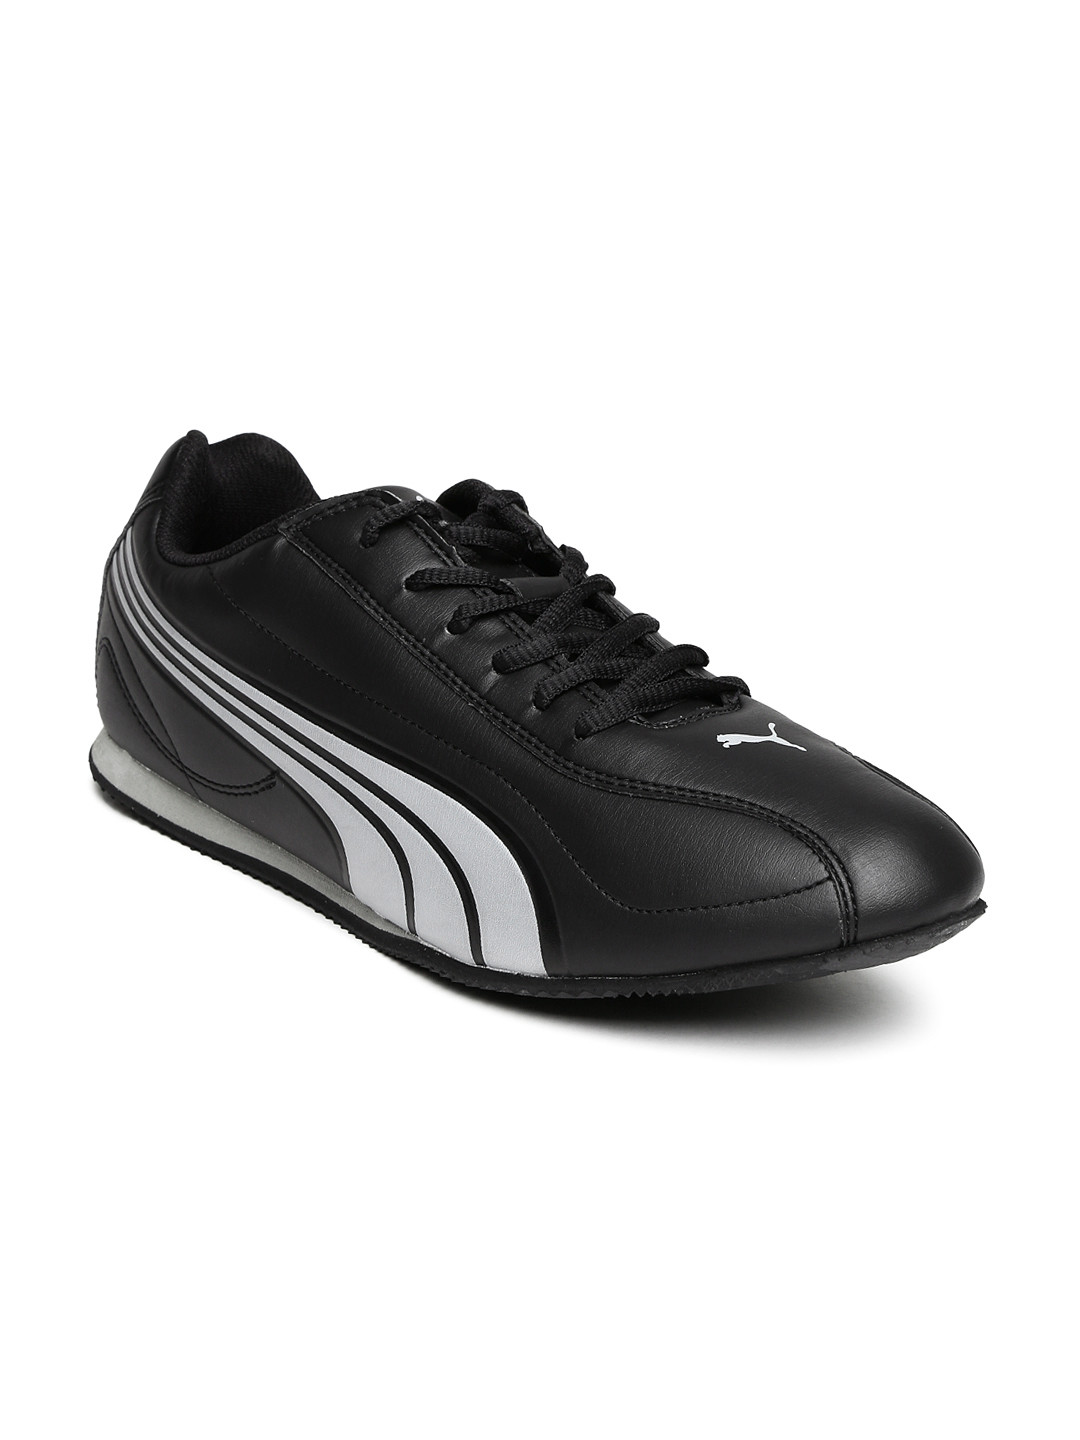 Buy Puma Mens Black Running Shoes Online @ ₹2299 from ShopClues